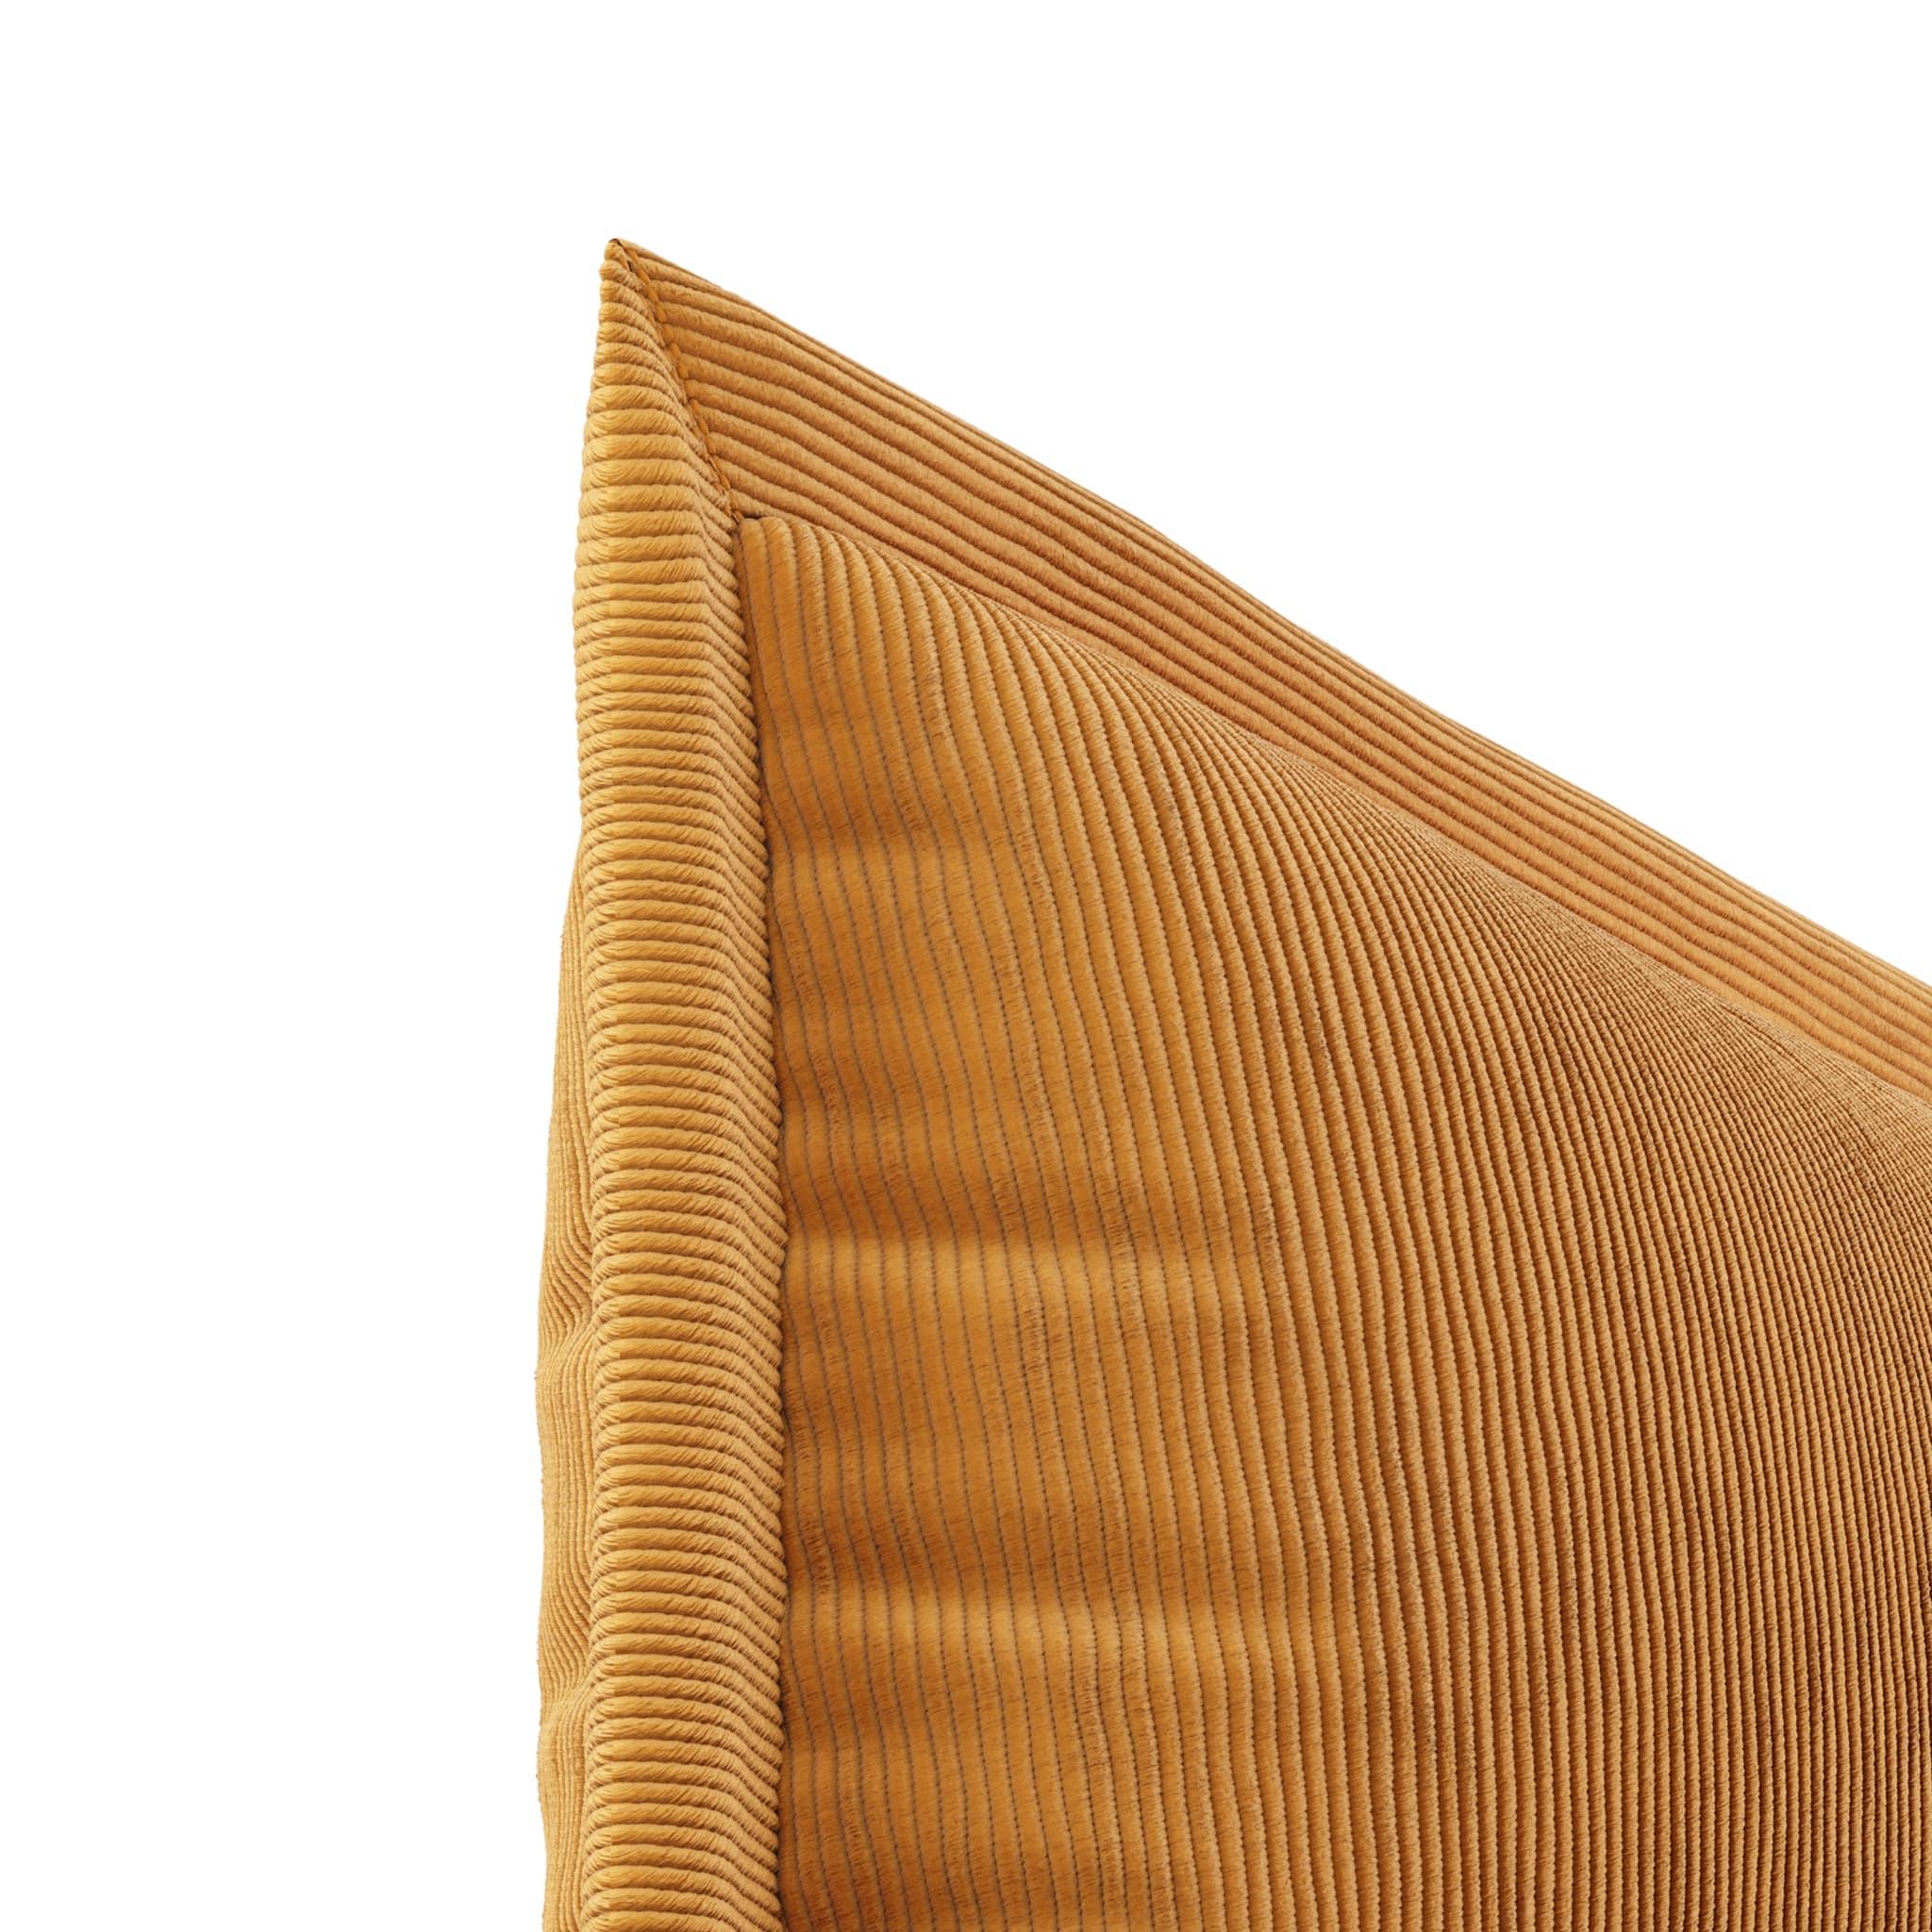 Decorative throw pillow mostaza corduroy, ribbed velvet modern lumbar cushion.
Mostaza is a rectangle flange pillow in plush corduroy with a turmeric yellow color. This absolute must-have throw pillow has a refined and playful feel that will give